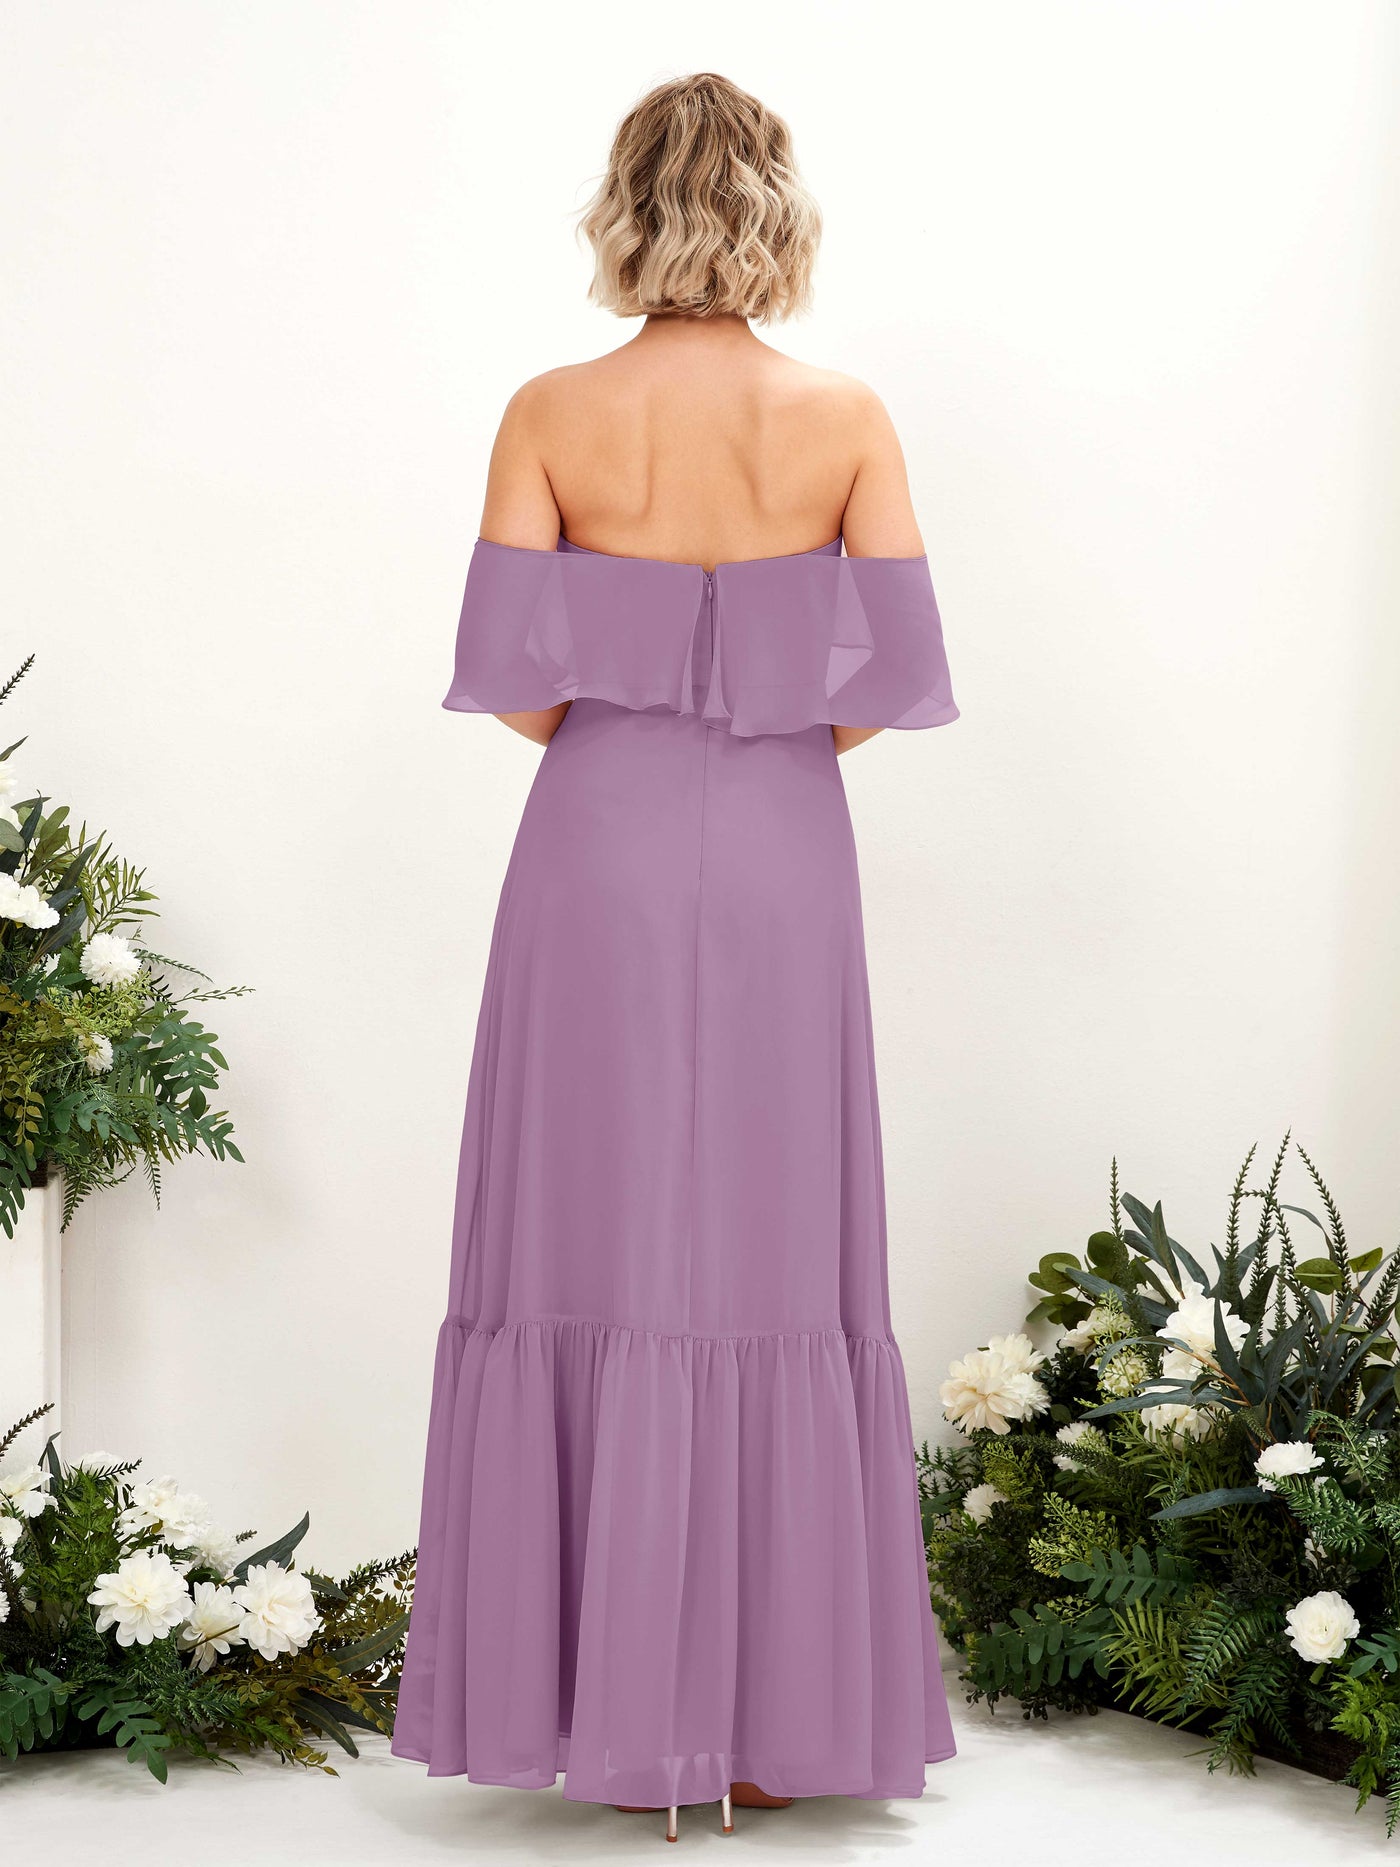 Orchid Mist Bridesmaid Dresses Bridesmaid Dress A-line Chiffon Off Shoulder Full Length Sleeveless Wedding Party Dress (81224521)#color_orchid-mist